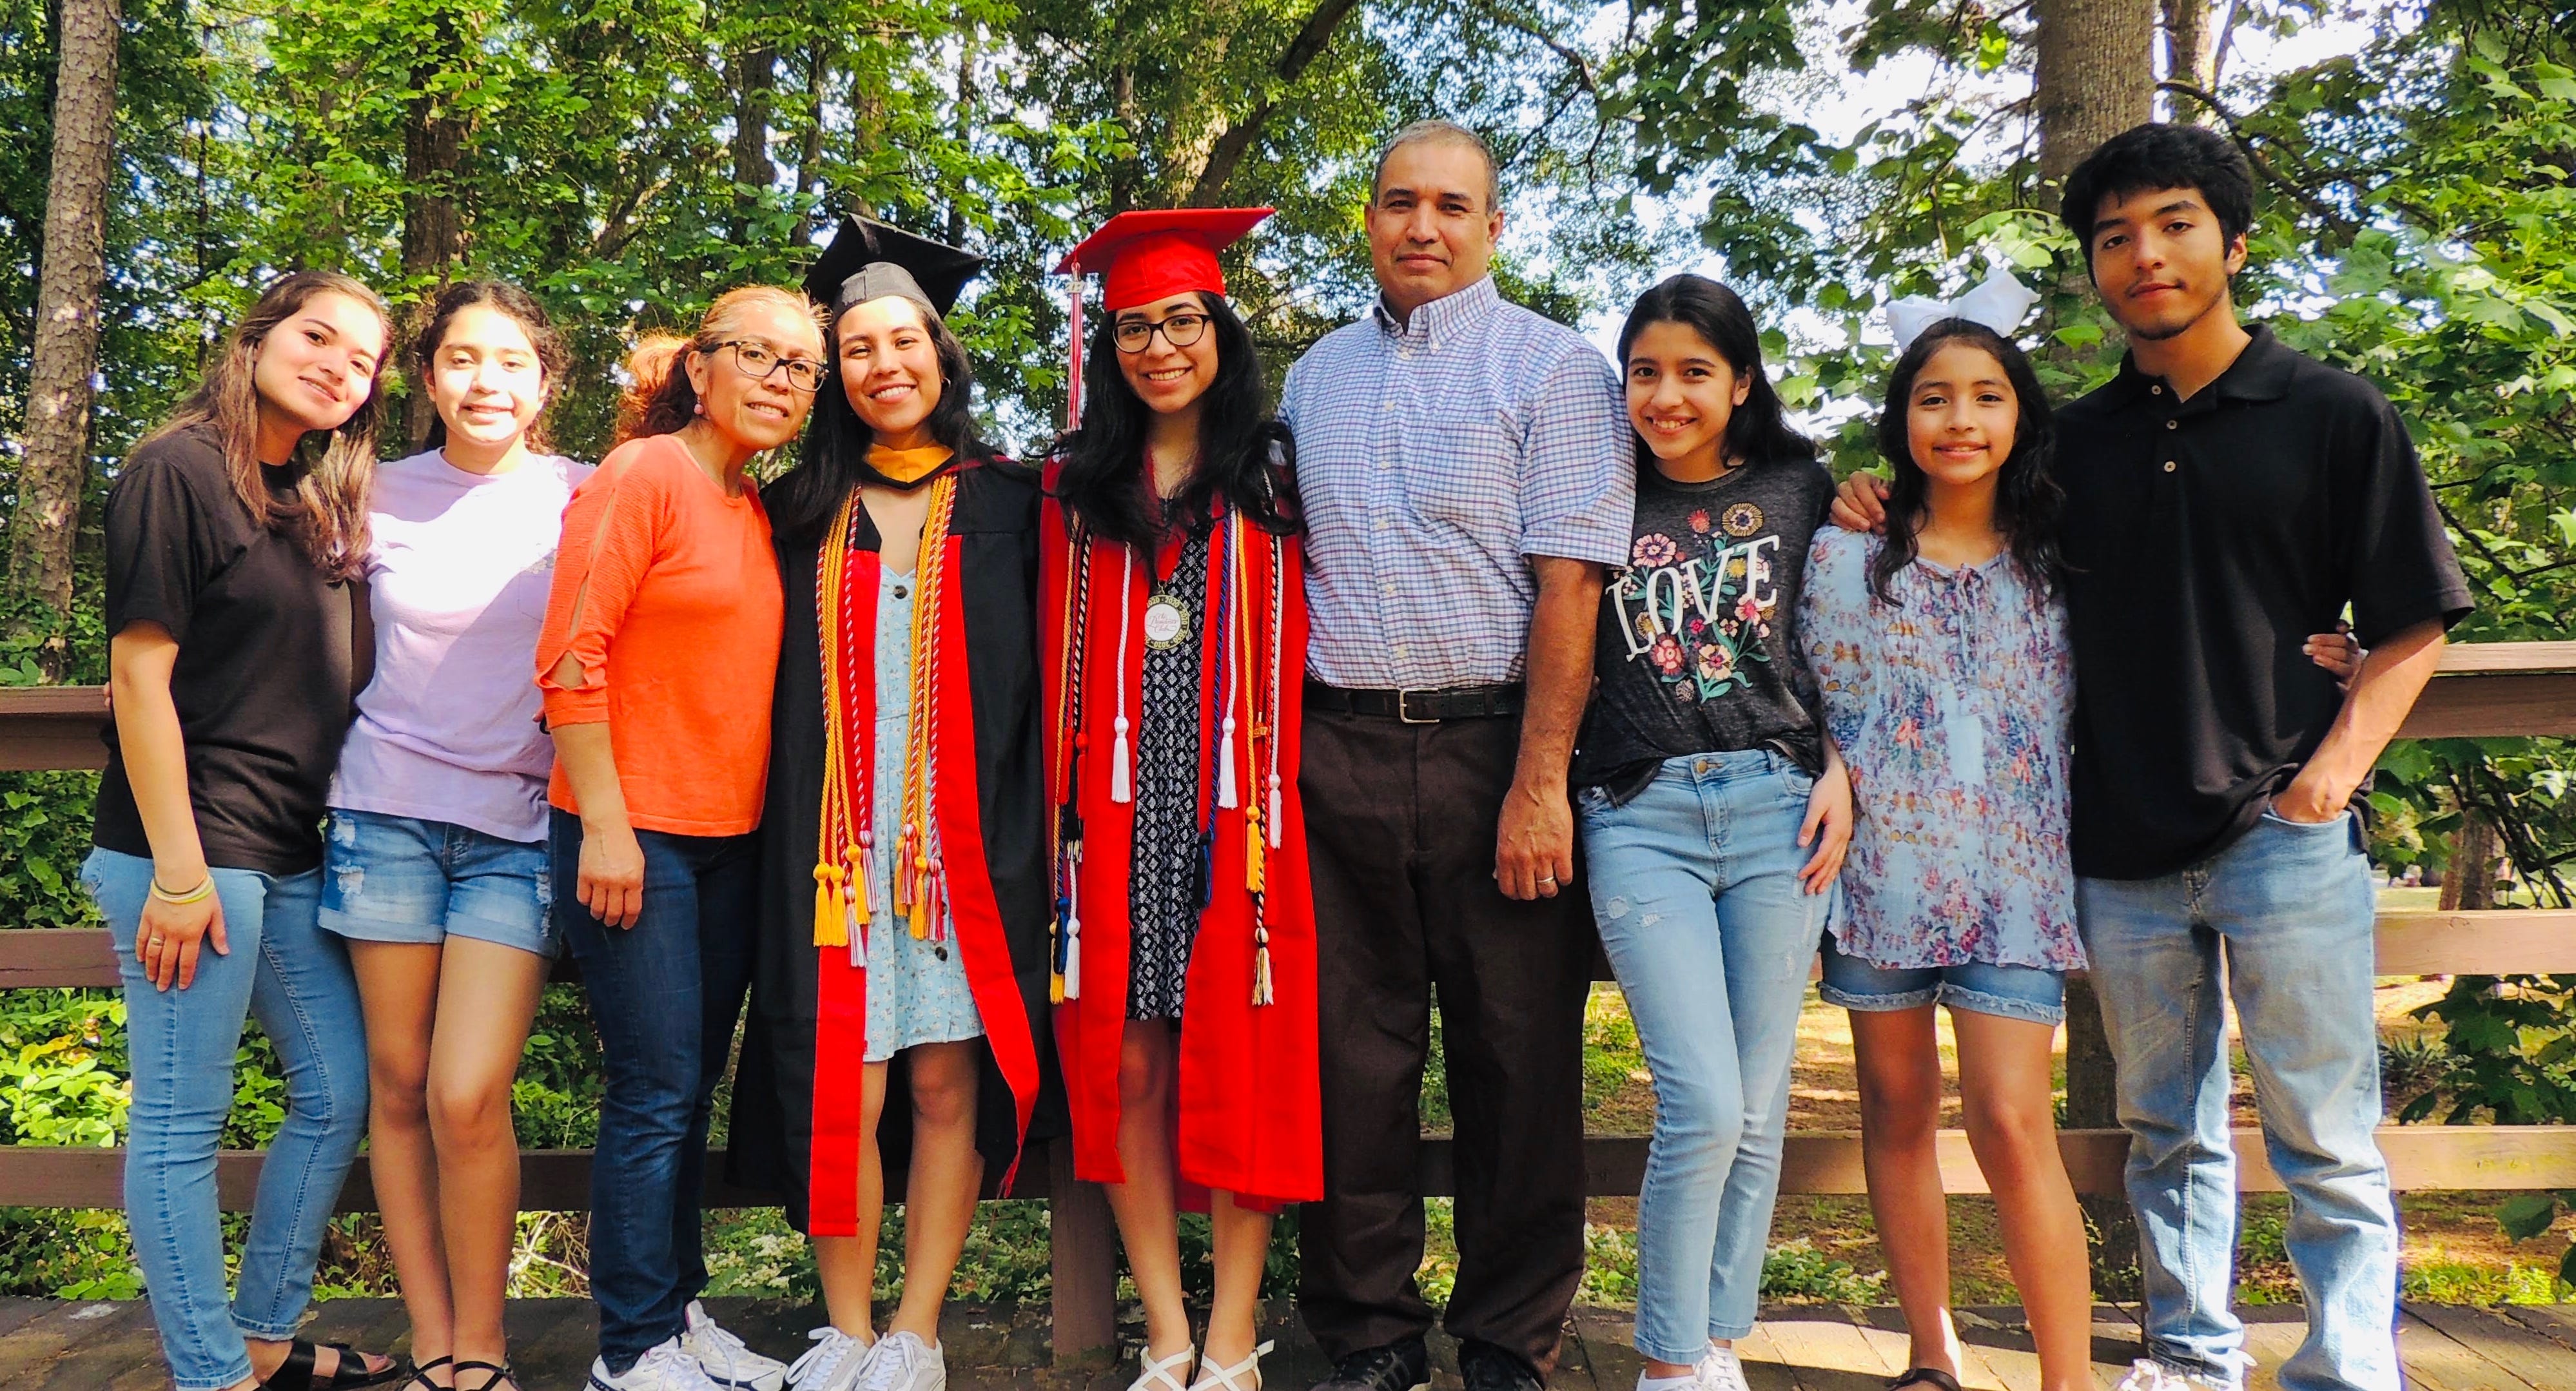 Indira Islas, a Dreamer whose parents fled violence in Mexico, graduated from Delaware State University.